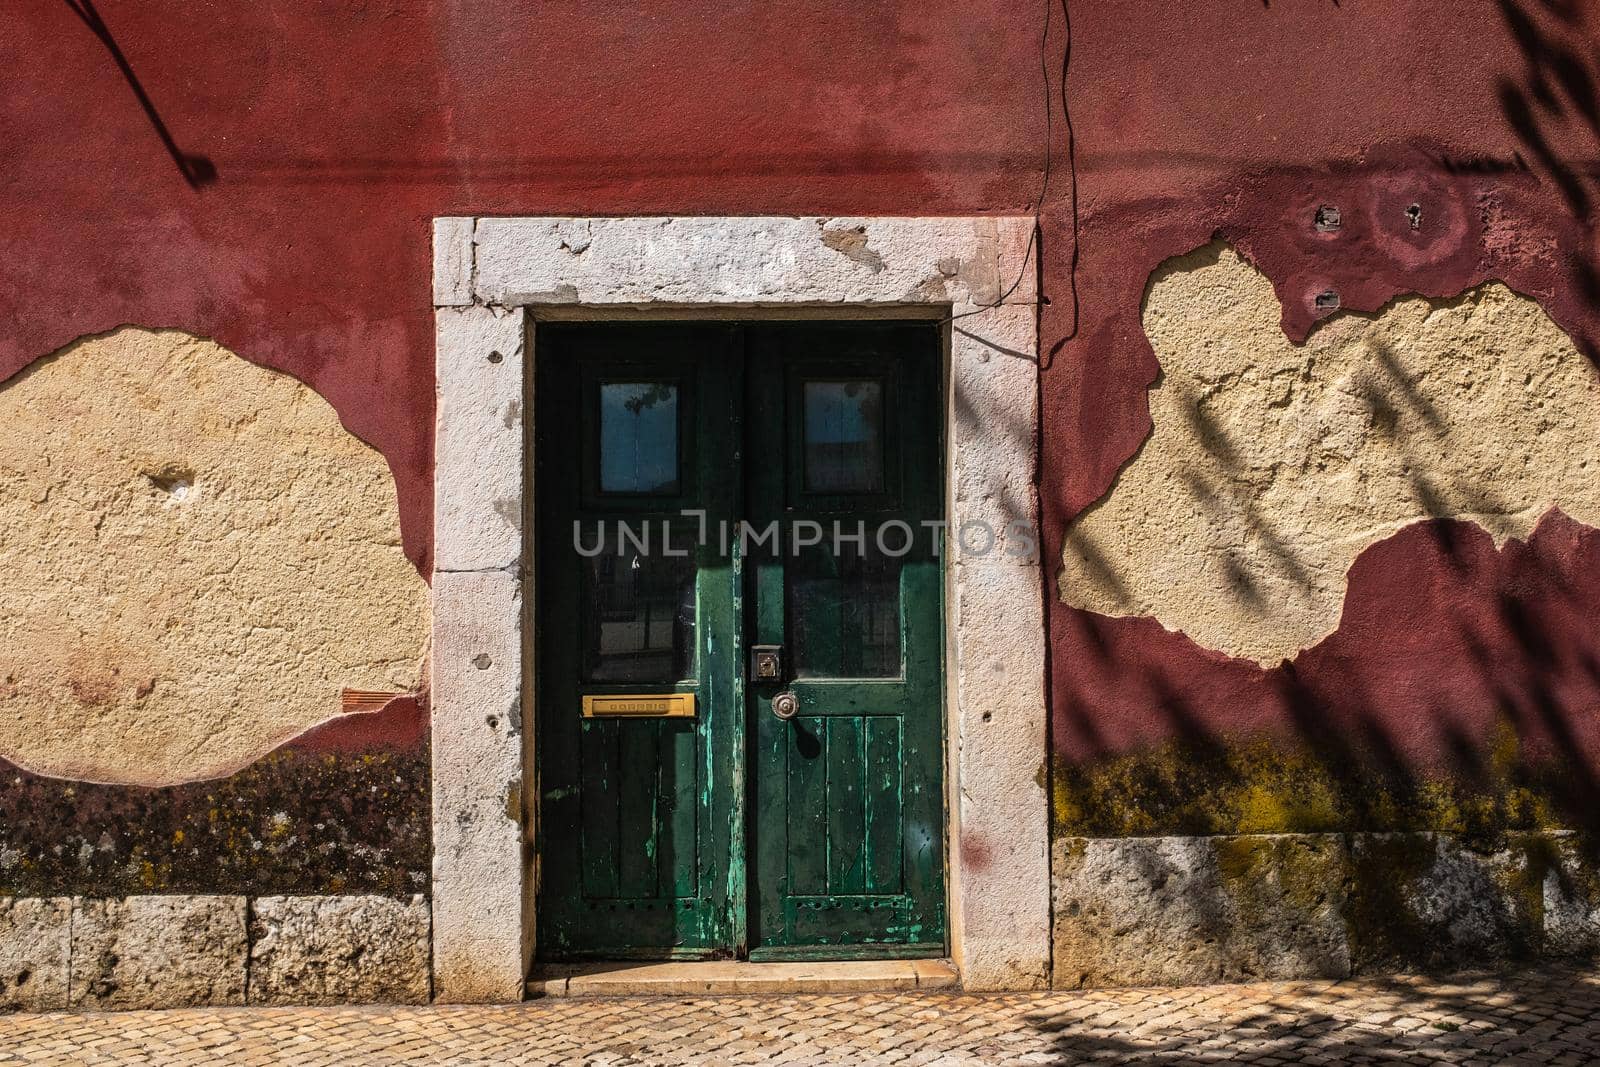 Partial view of the facade of a building located in the old neighborhood of Alfama in Lisbon. The entrance door is green and the exterior plaster is maroon. The wall is deteriorated by mold, rising damp and peeling plaster.